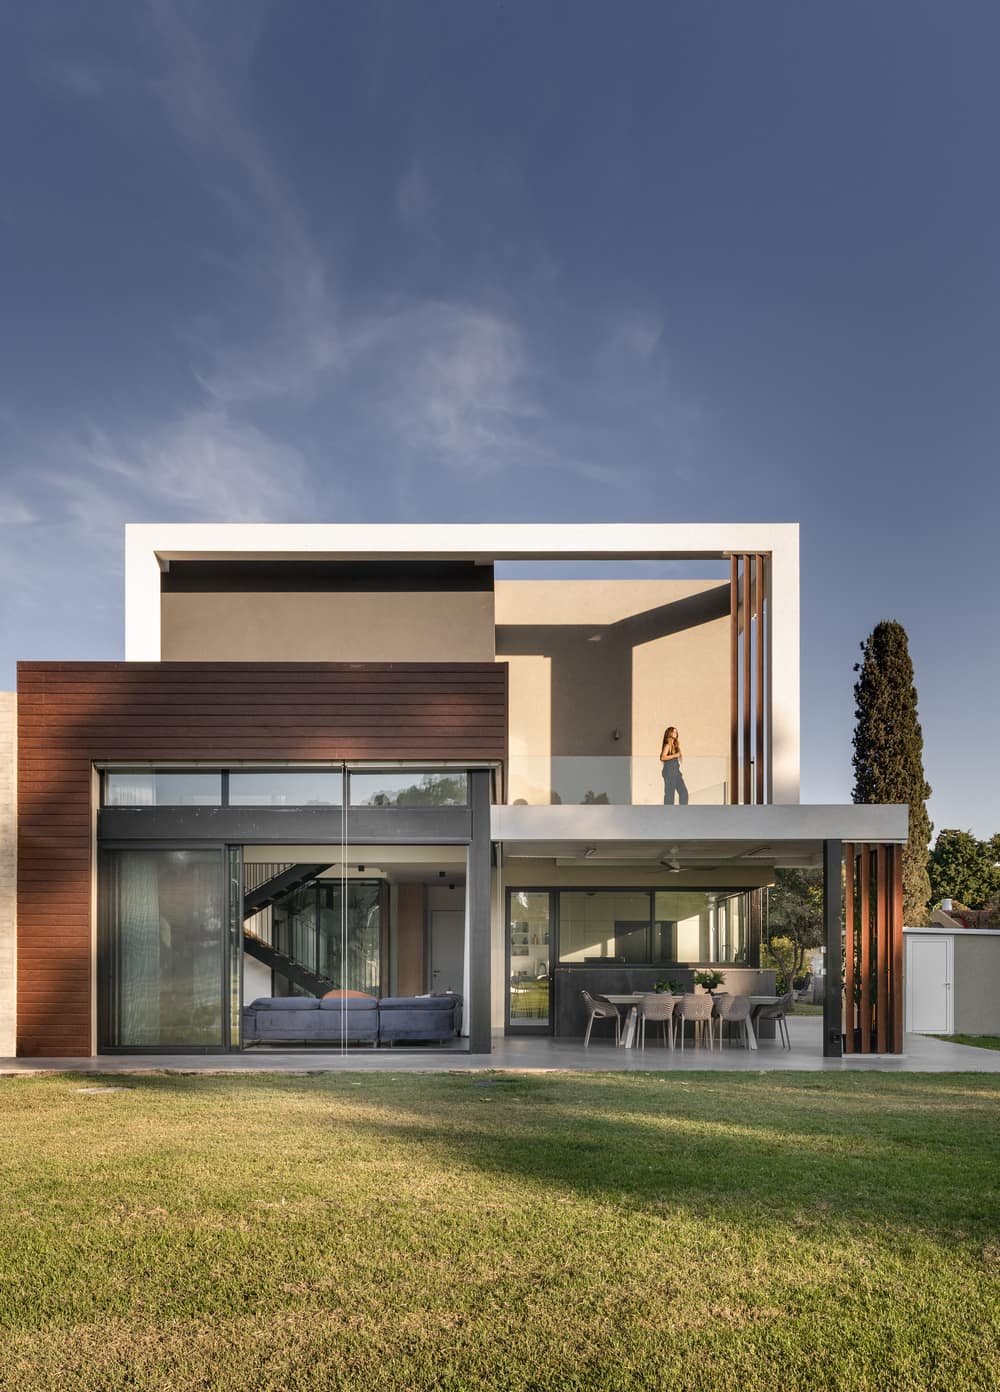 Western Galilee House - A Project by Adi Aronov